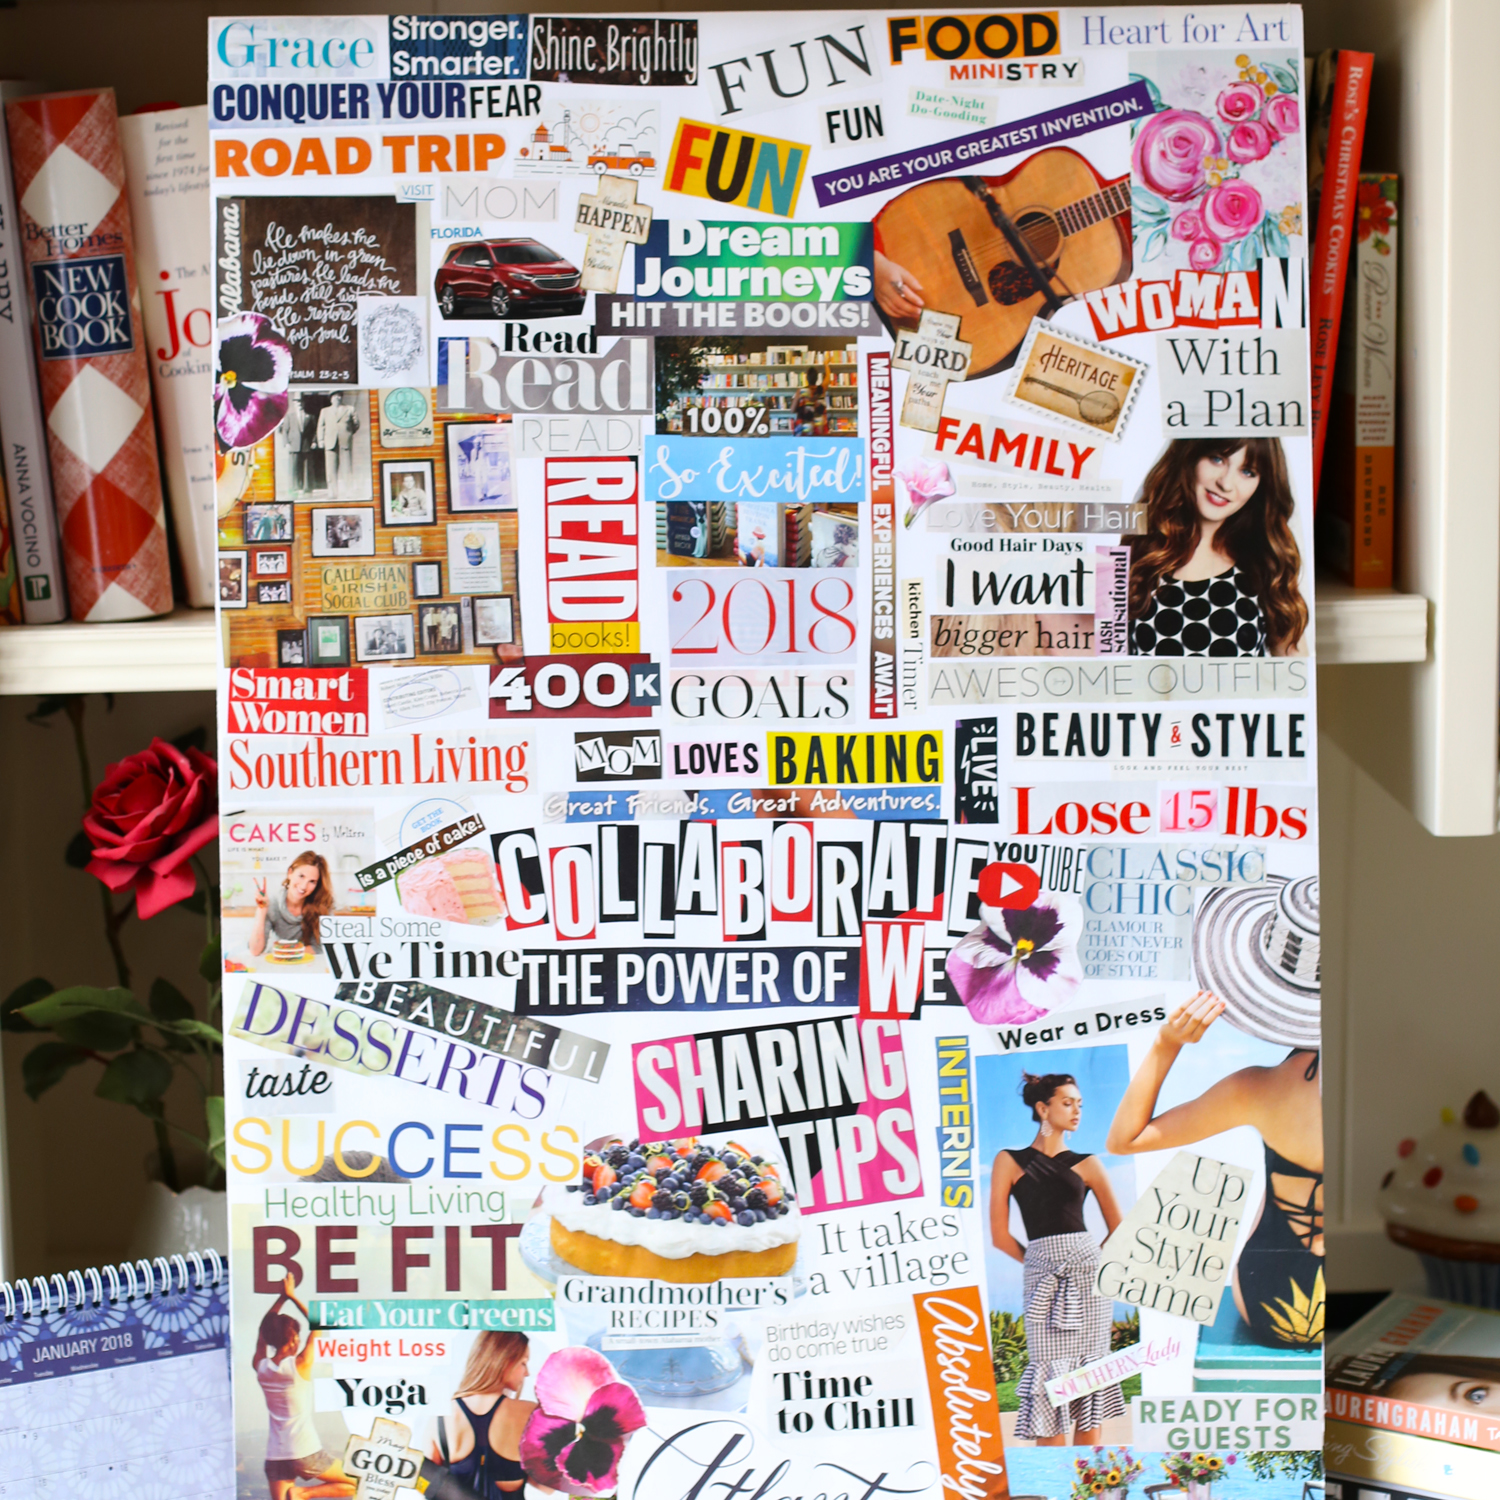 vision board workshop — Be More Consulting